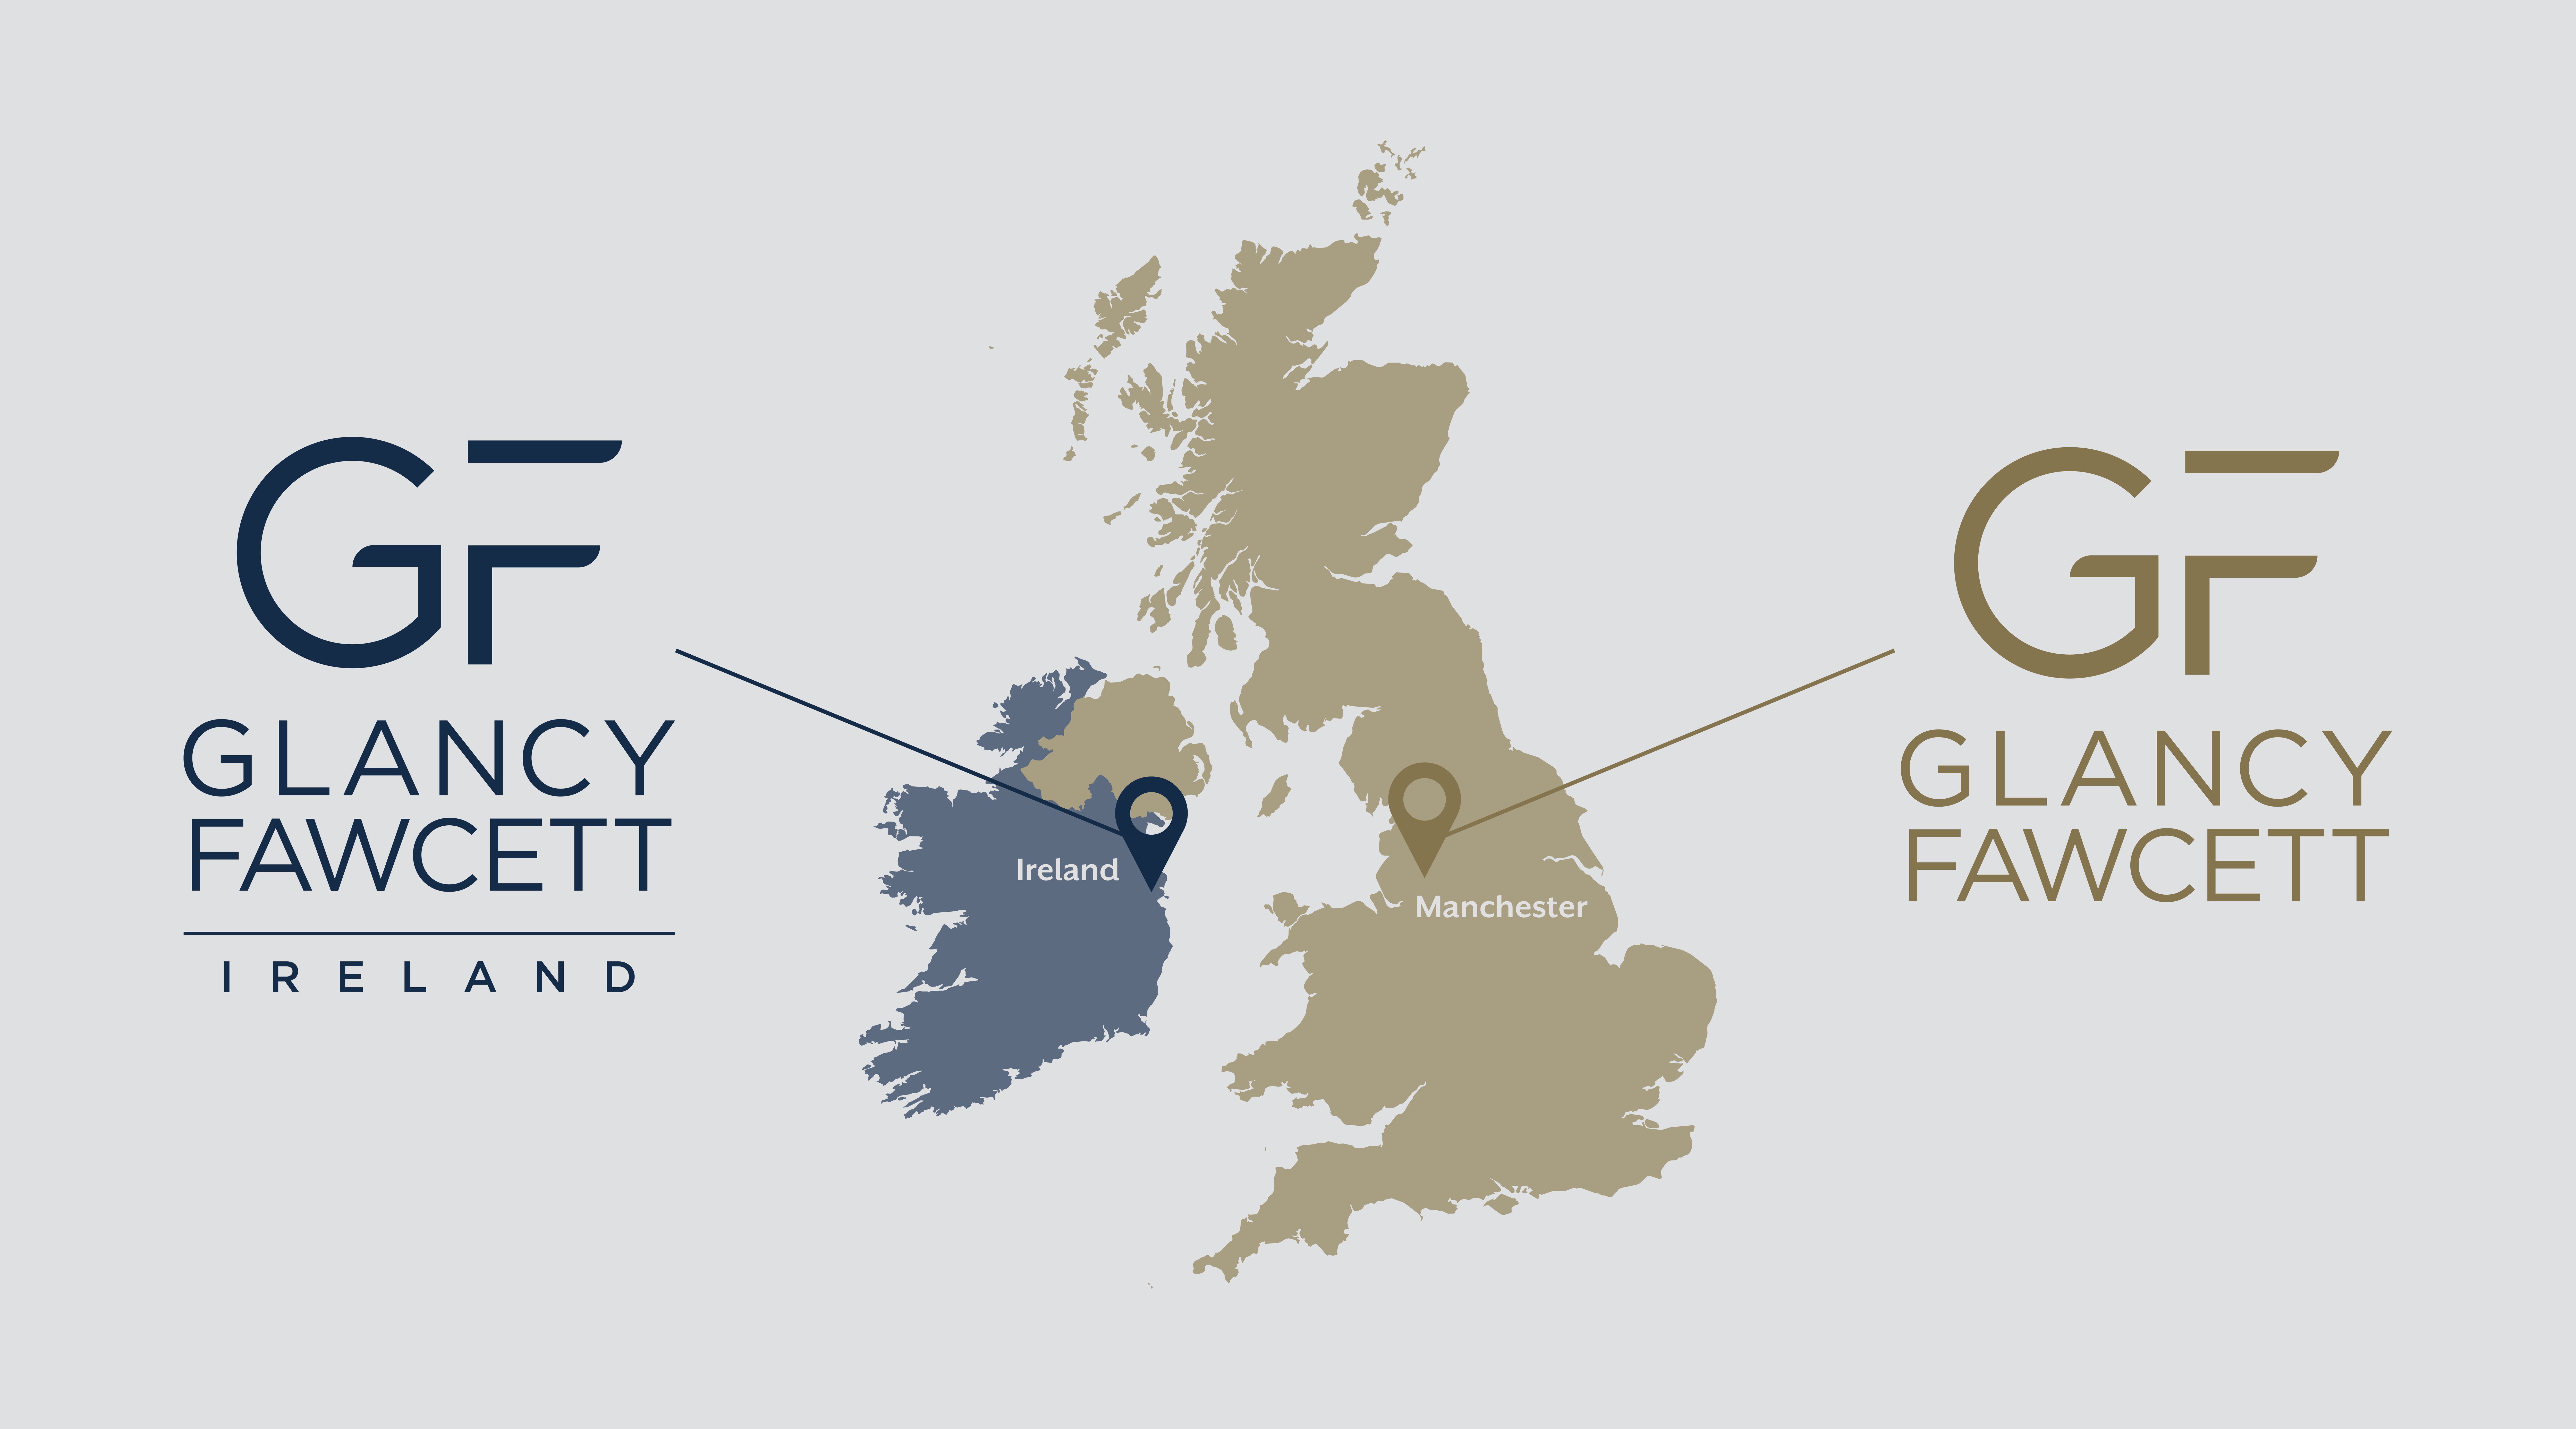 Glancy Fawcett Logistics - Providing a seamless service to out global clients